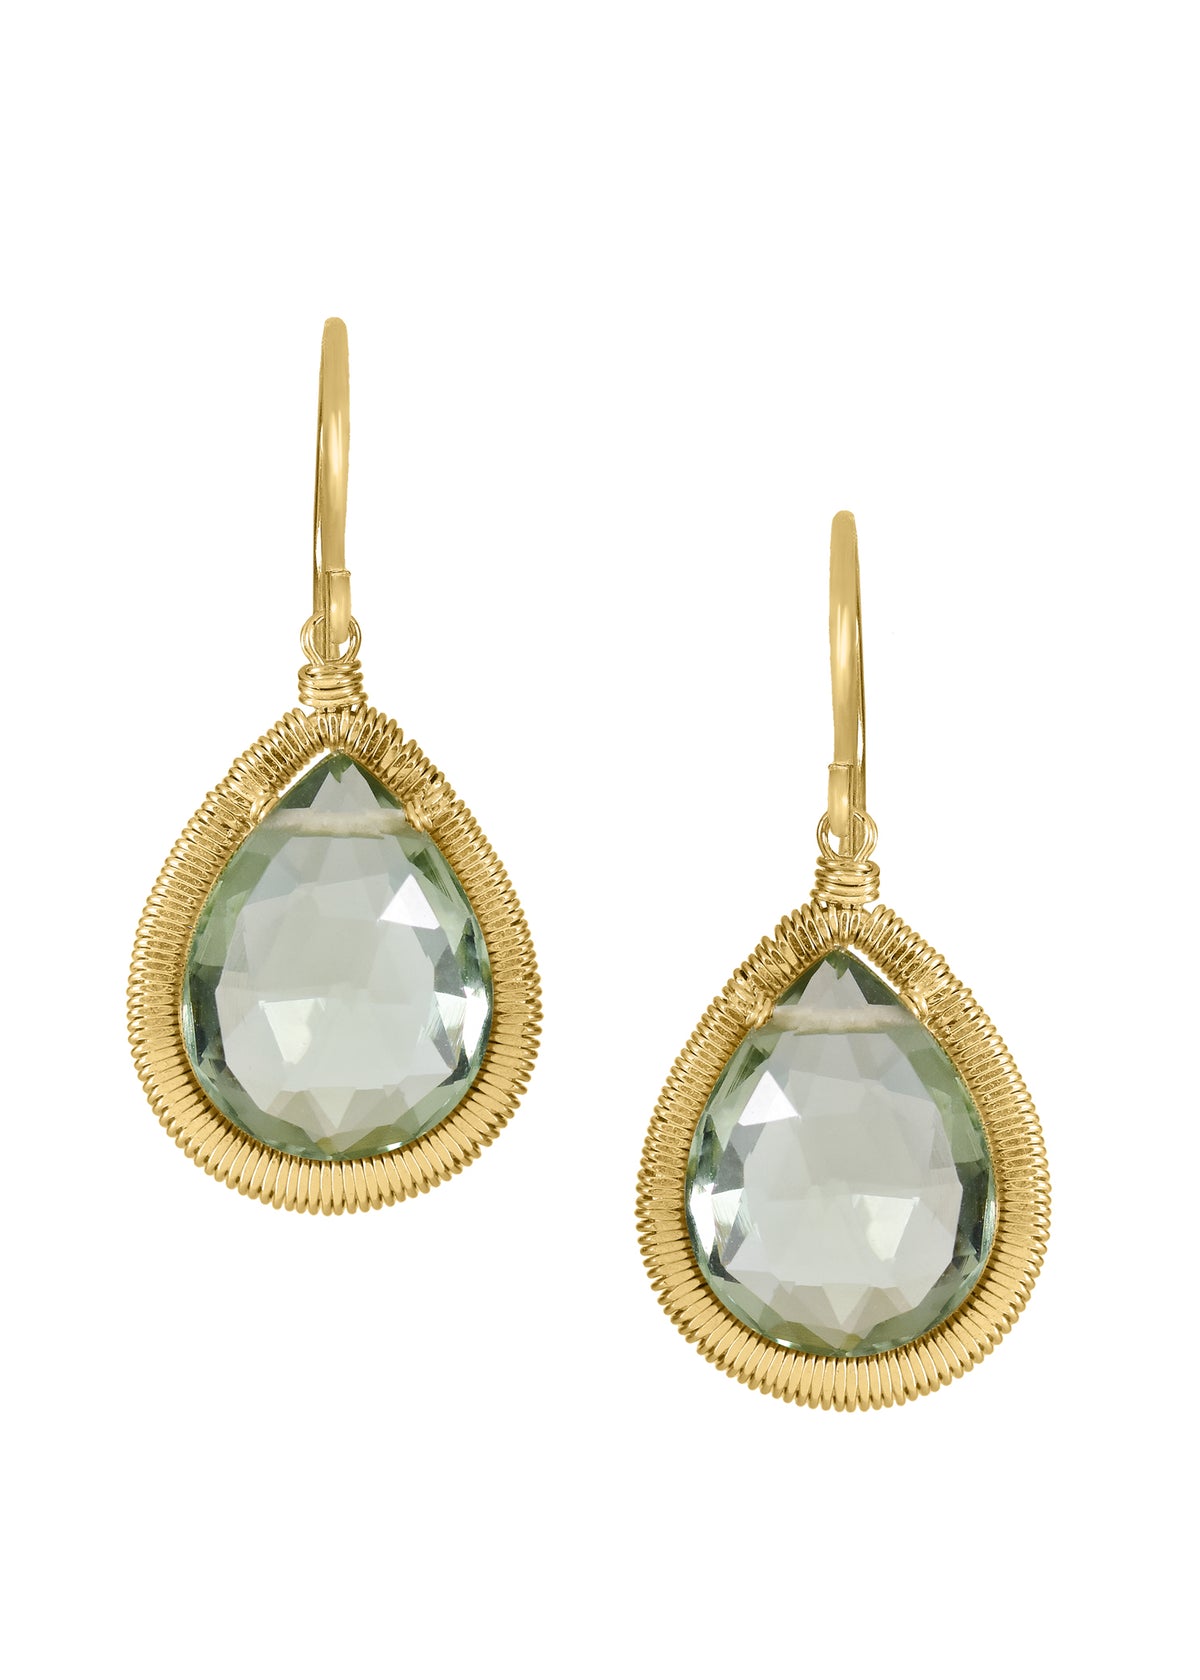 Green quartz 14k gold fill Earrings measure 1&quot; in length (including the ear wires) and 1/2&quot; in width at the widest point Handmade in our Los Angeles studio